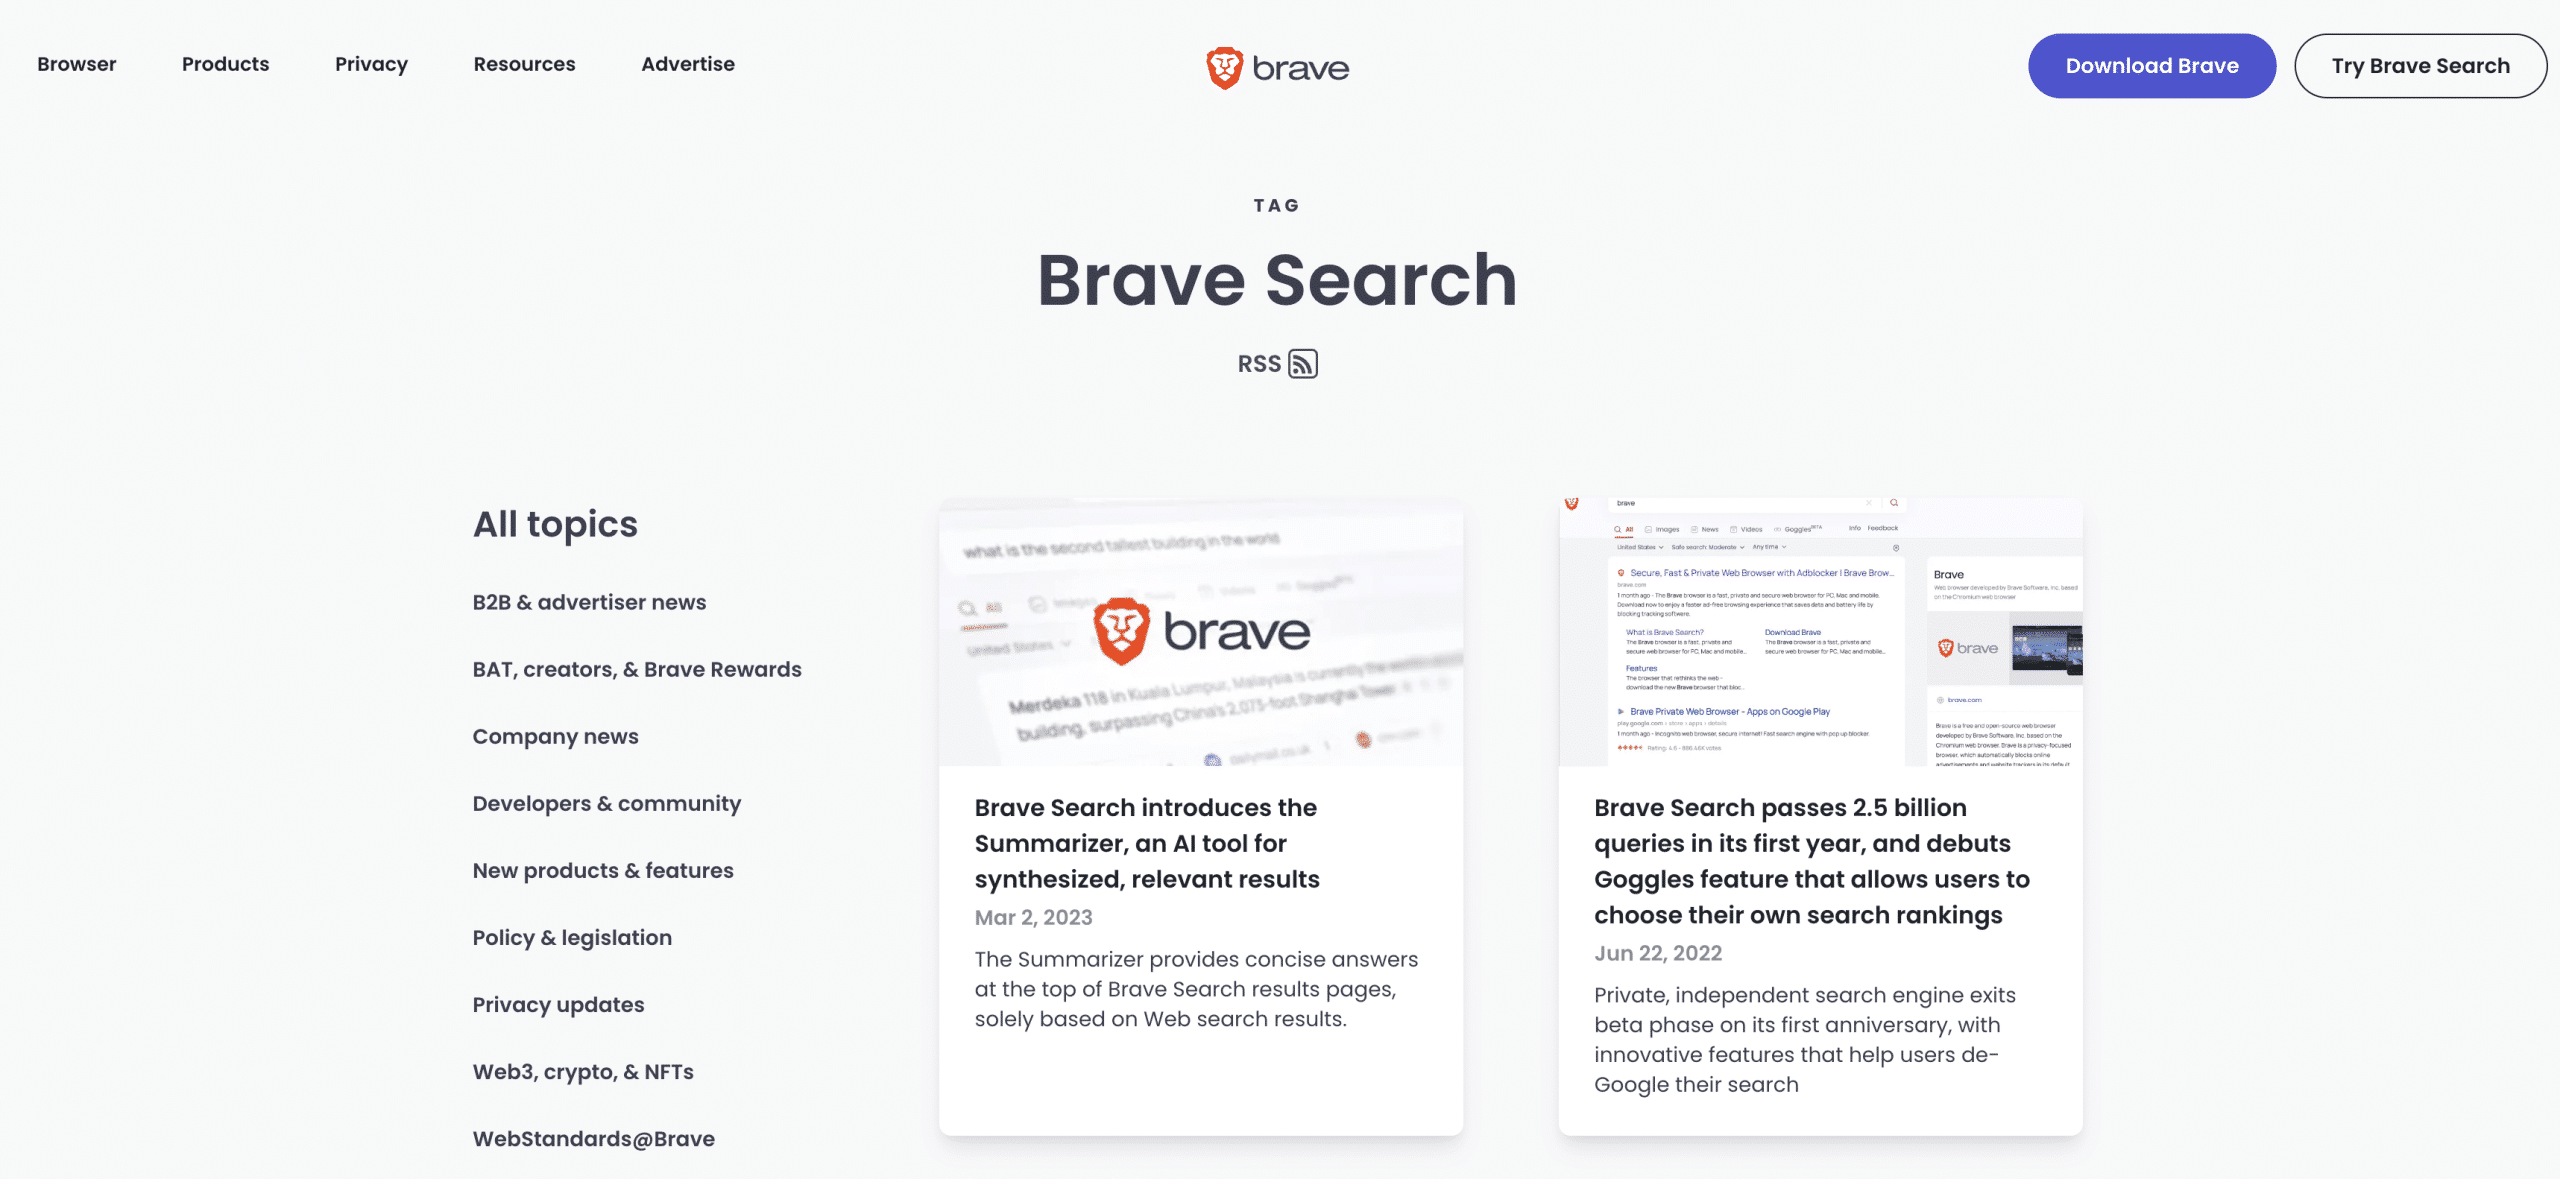 screenshot shows landing page for brave search engine